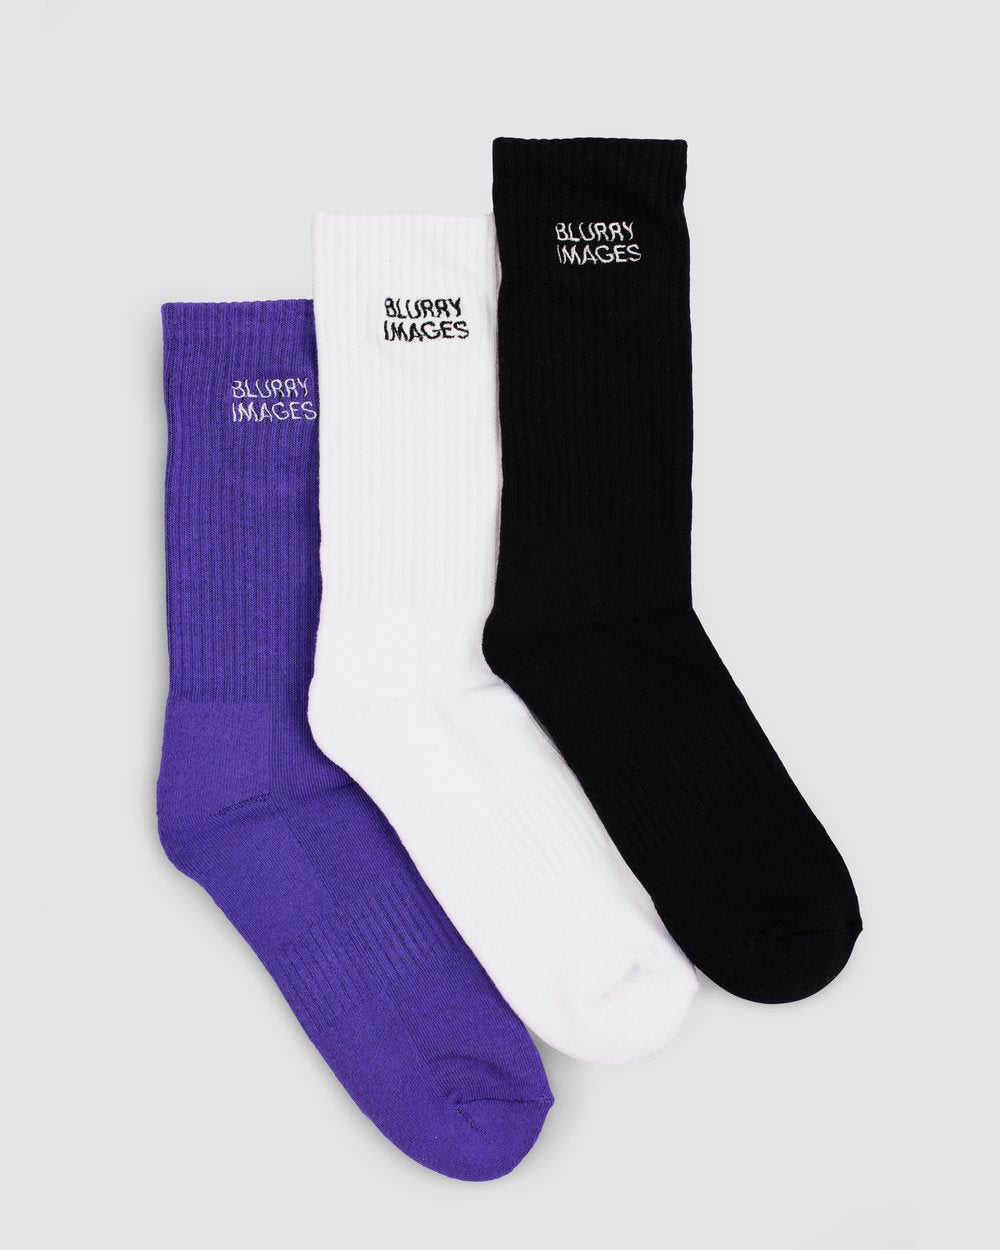 Blurry Images - Cushioned Socks 3-Pack